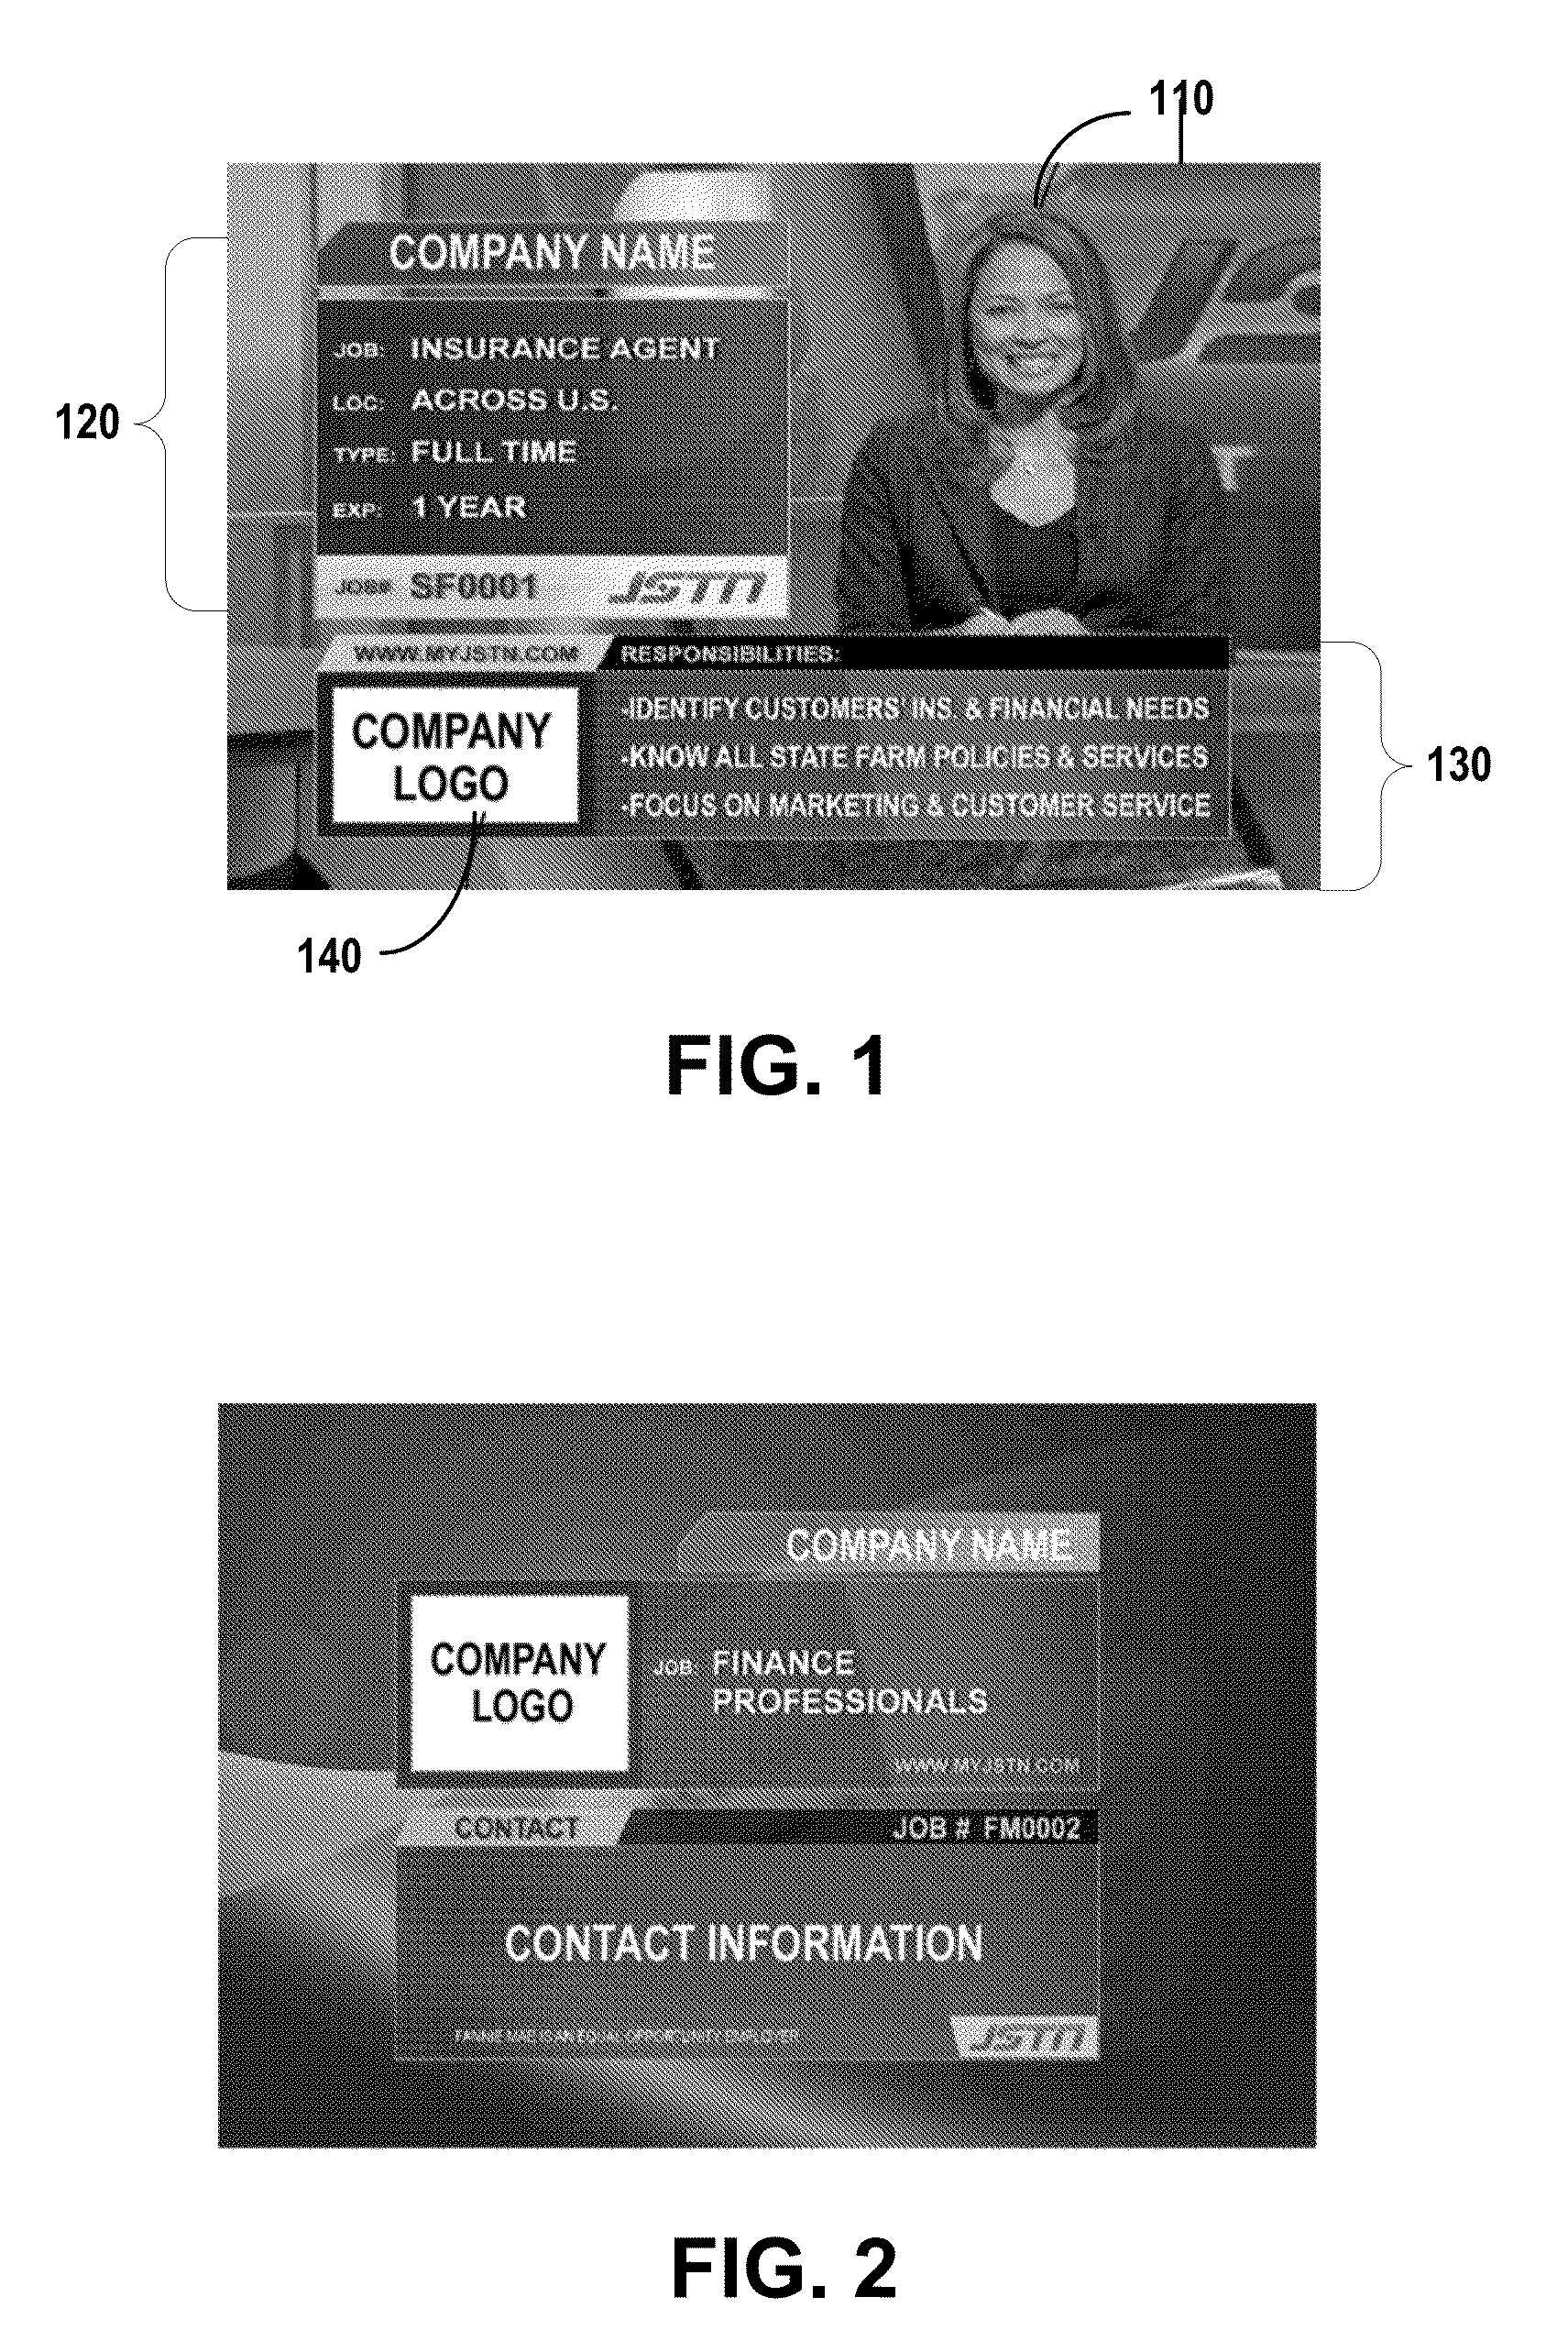 System and method for providing visual job information and job seeker's information